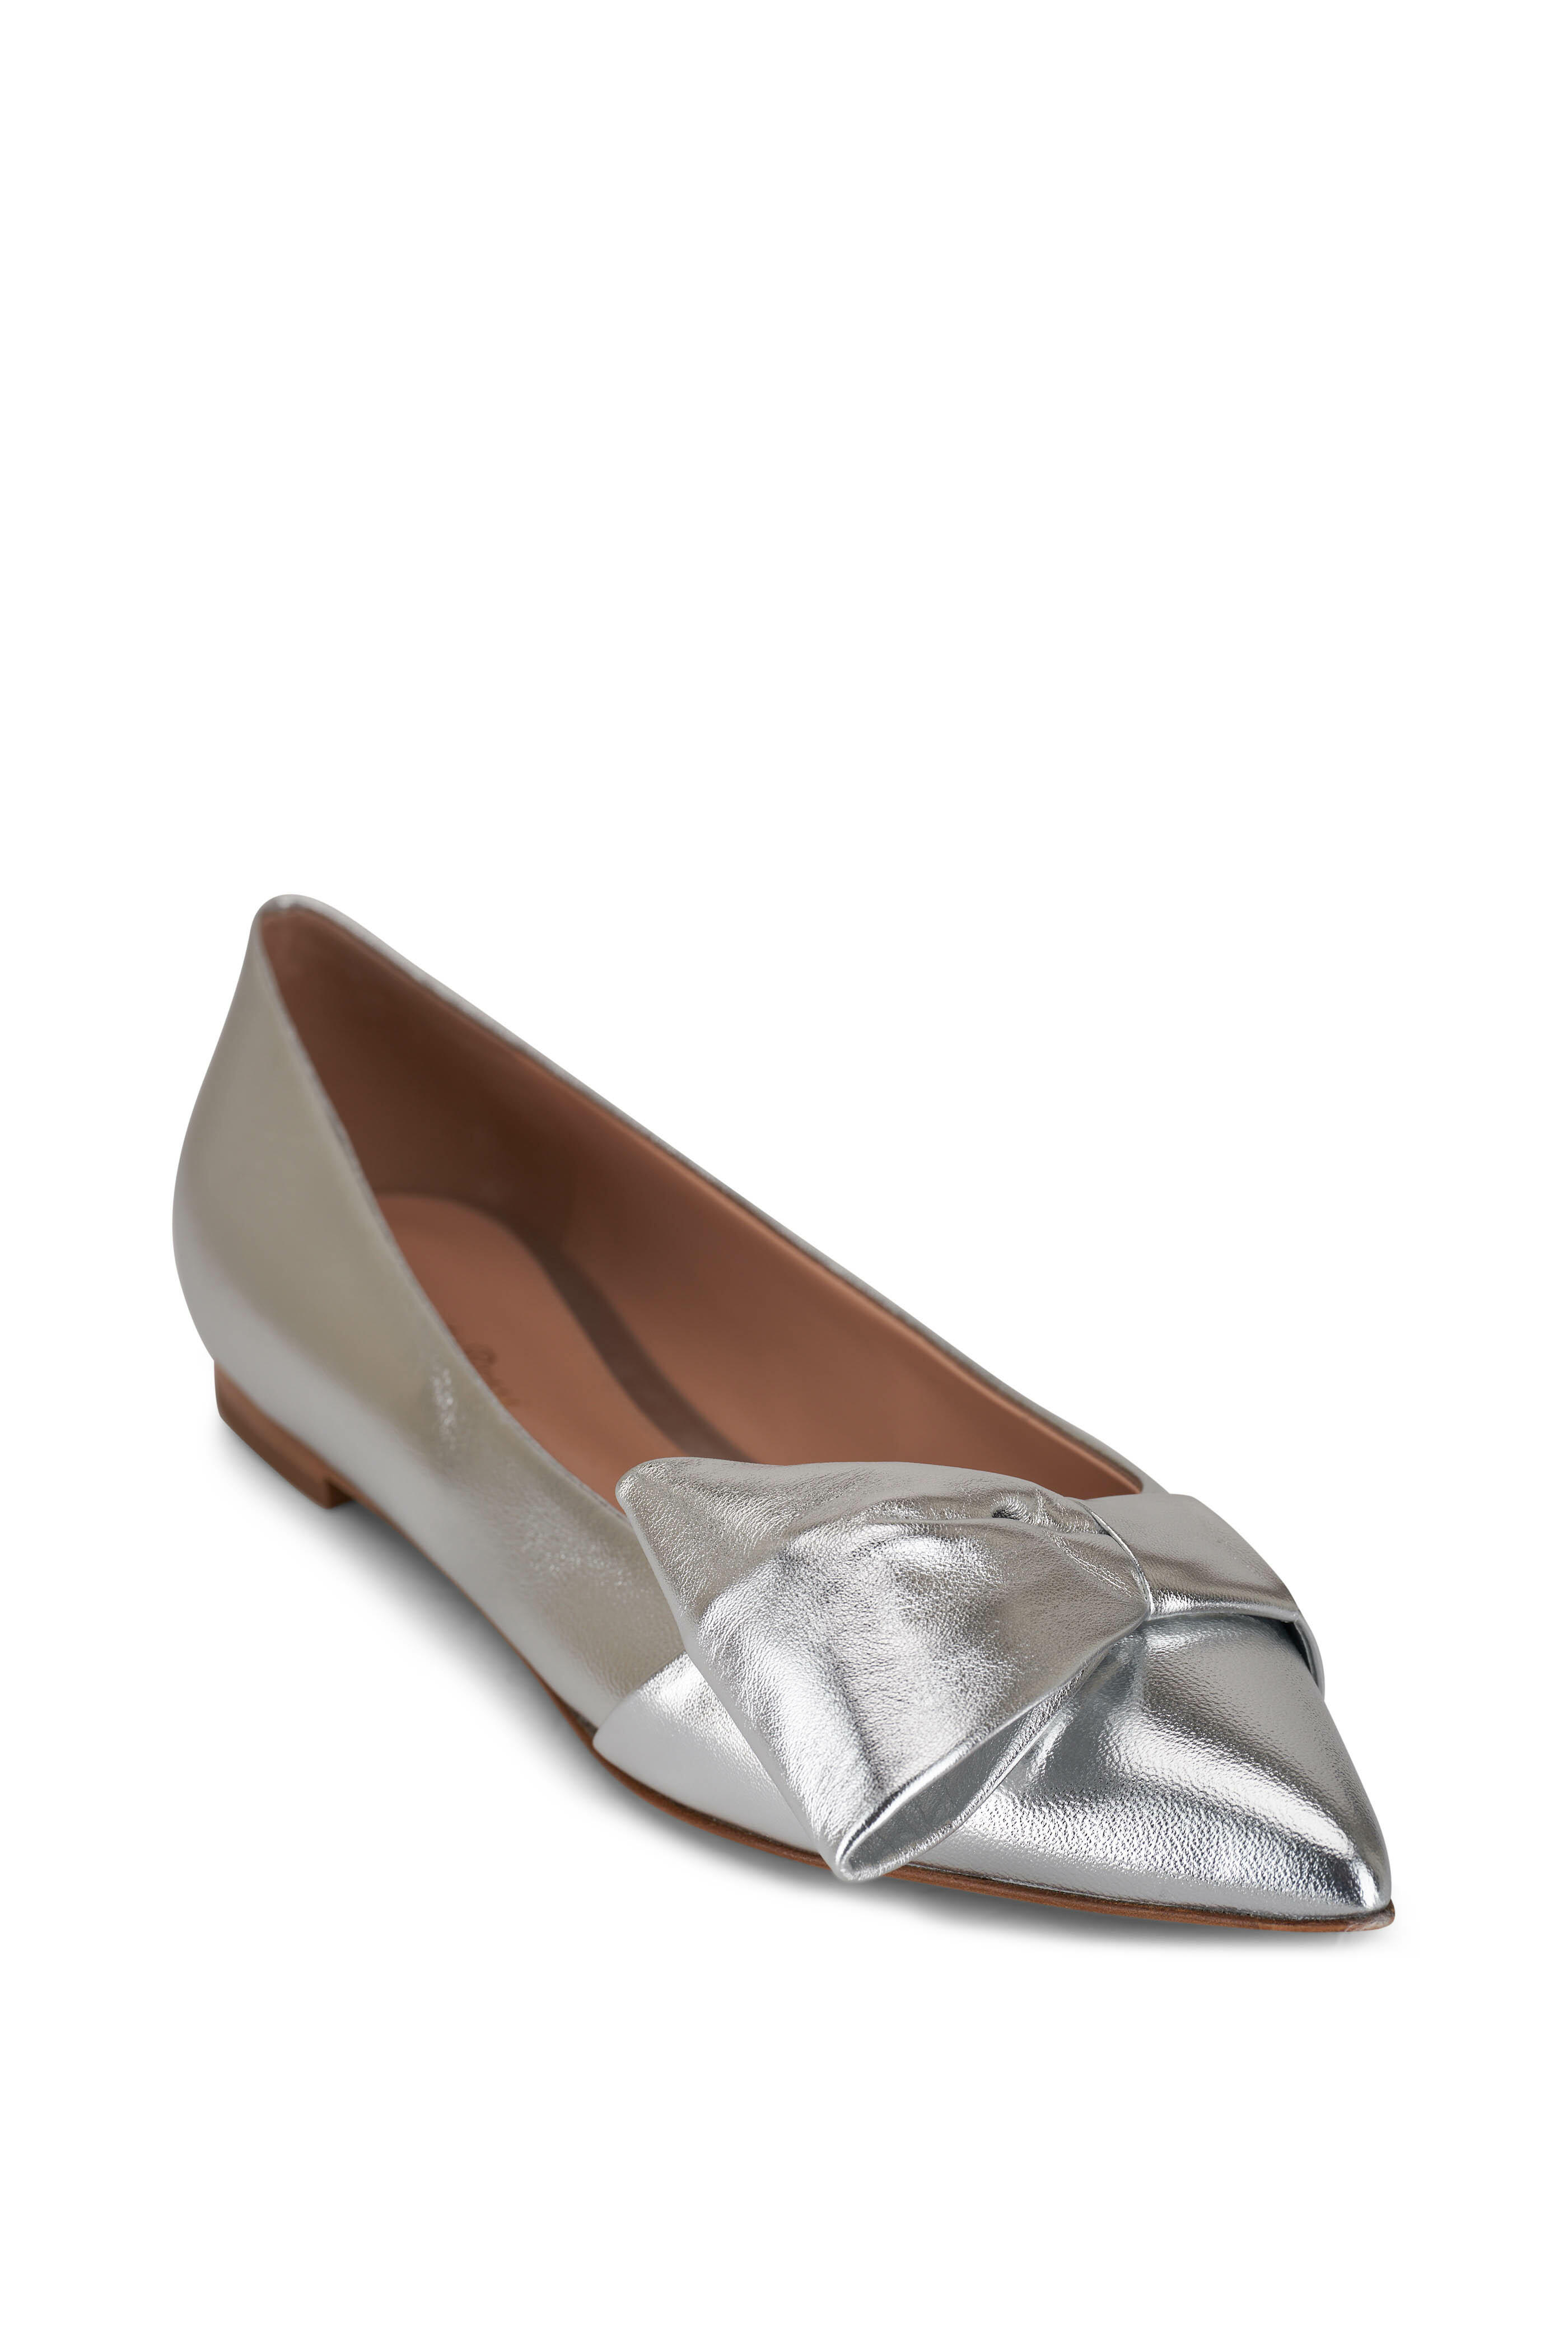 Gianvito Rossi - Silver Metallic Leather Flat | Mitchell Stores